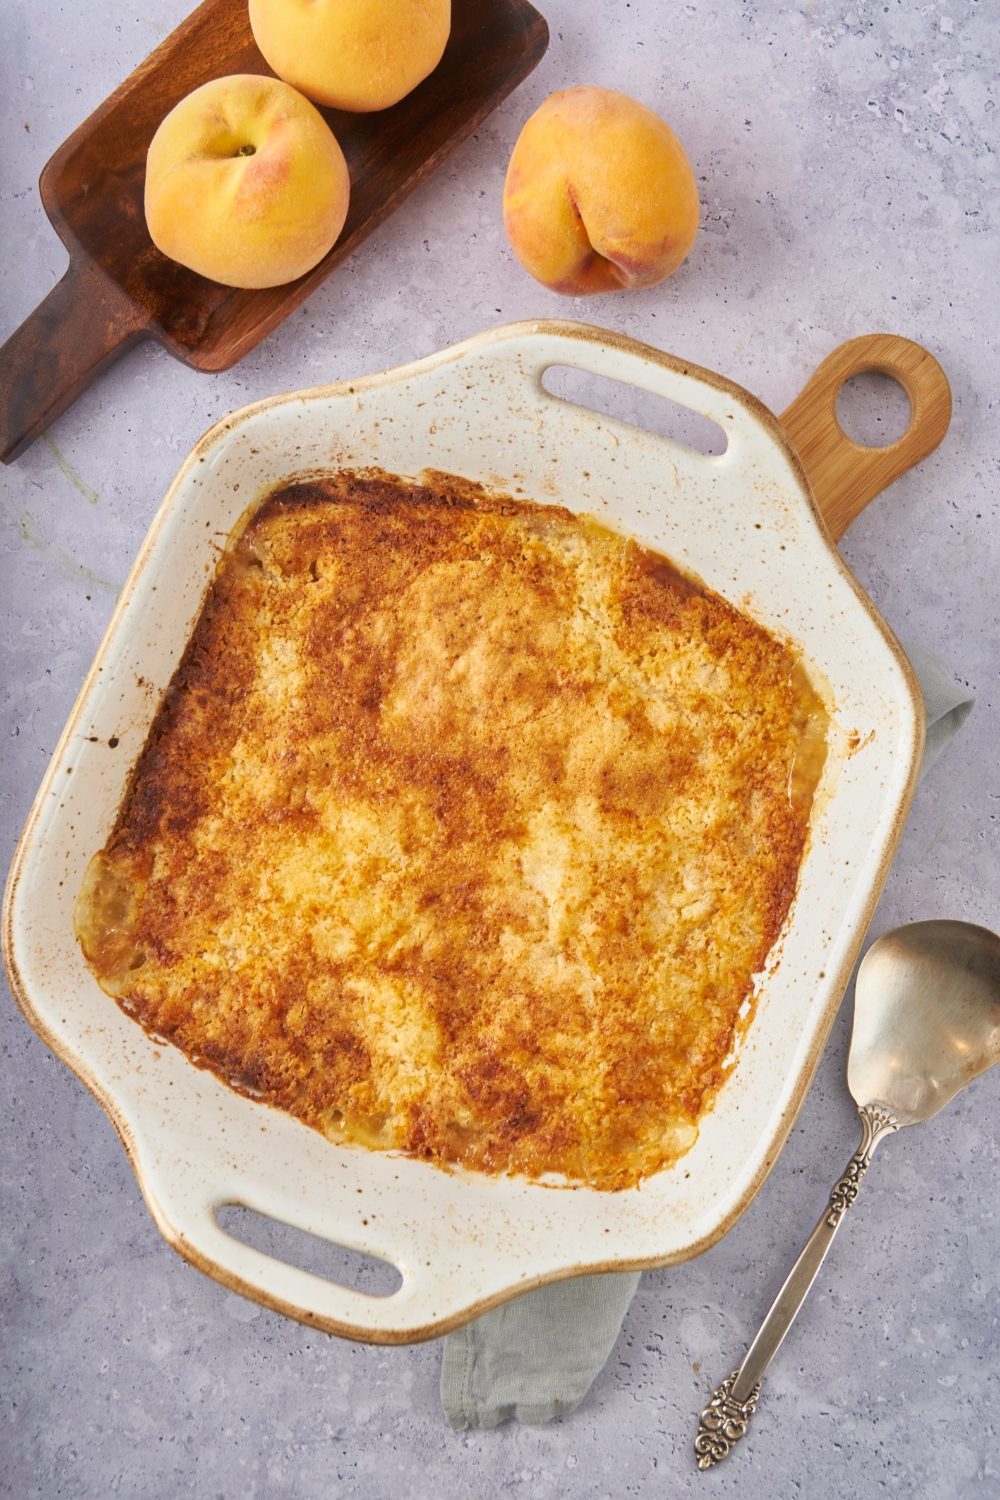 Square baking dish filled with freshly baked peach cobbler covered in a golden brown crust with a serving spoon next to it.